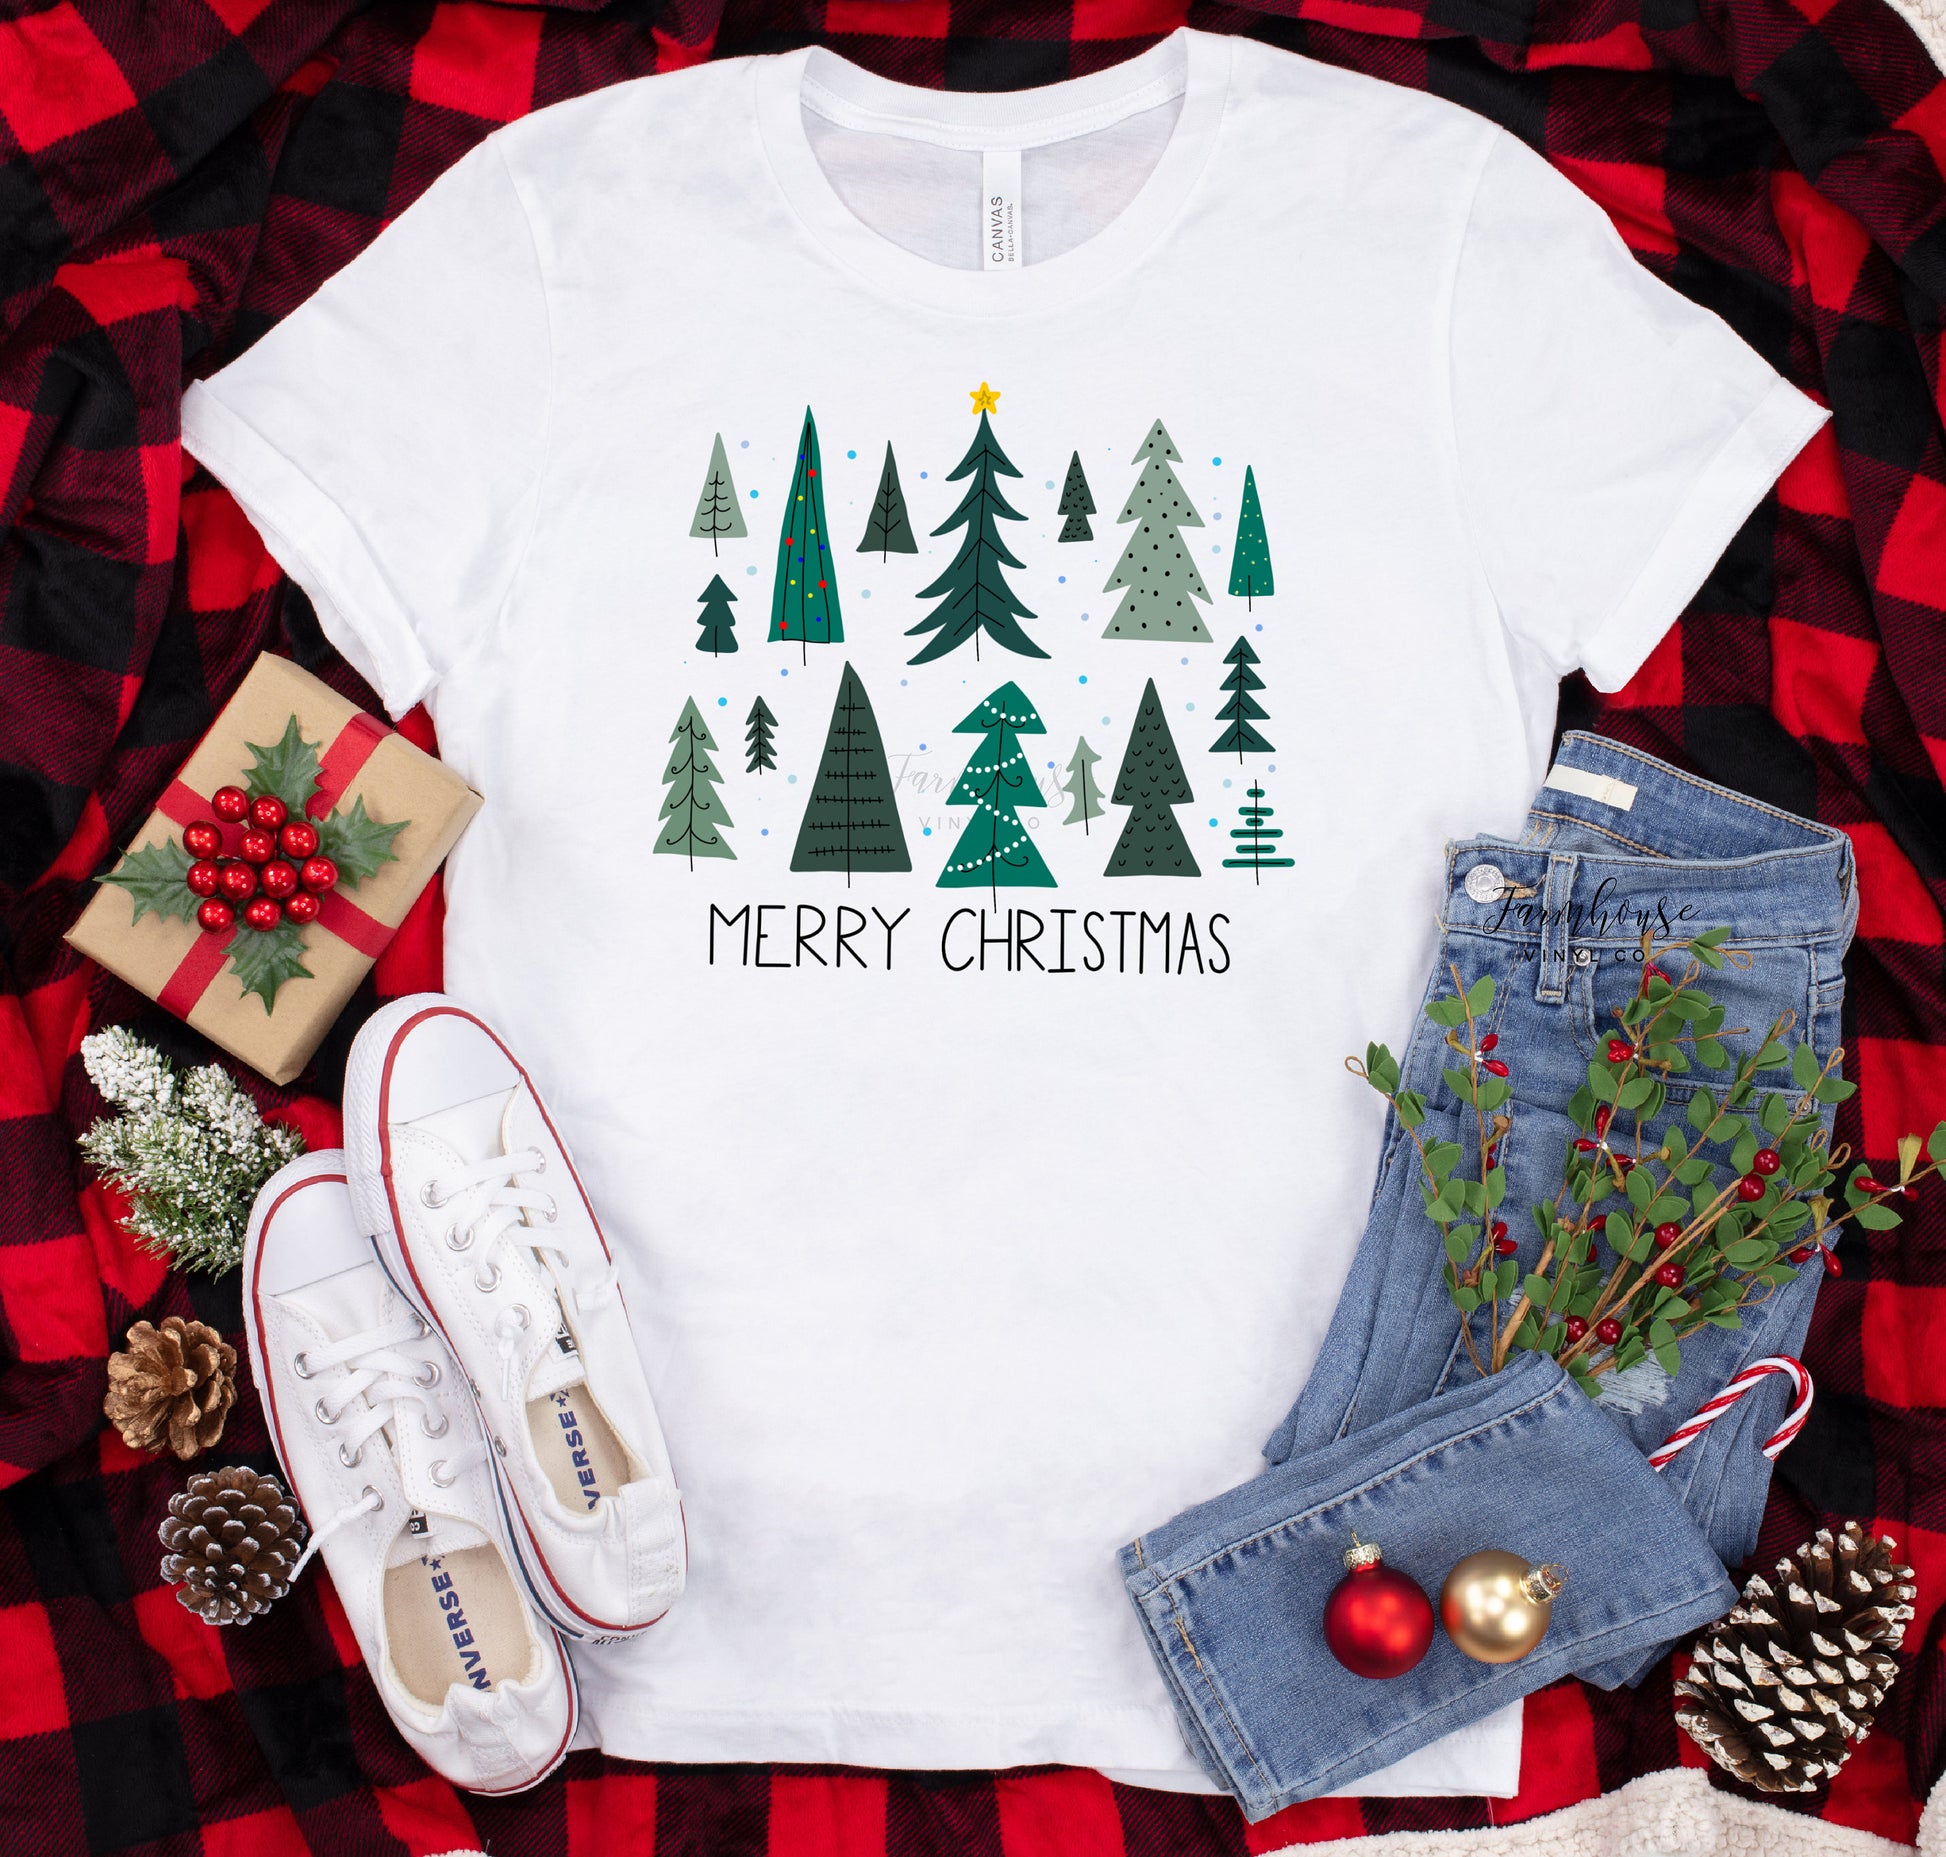 Christmas Unisex Bella Canvas T-Shirt~Christmas Shirts~Most Wonderful Time of the Year~Hot Cocoa~Christmas Lights~Merry and Bright Shirt - Farmhouse Vinyl Co